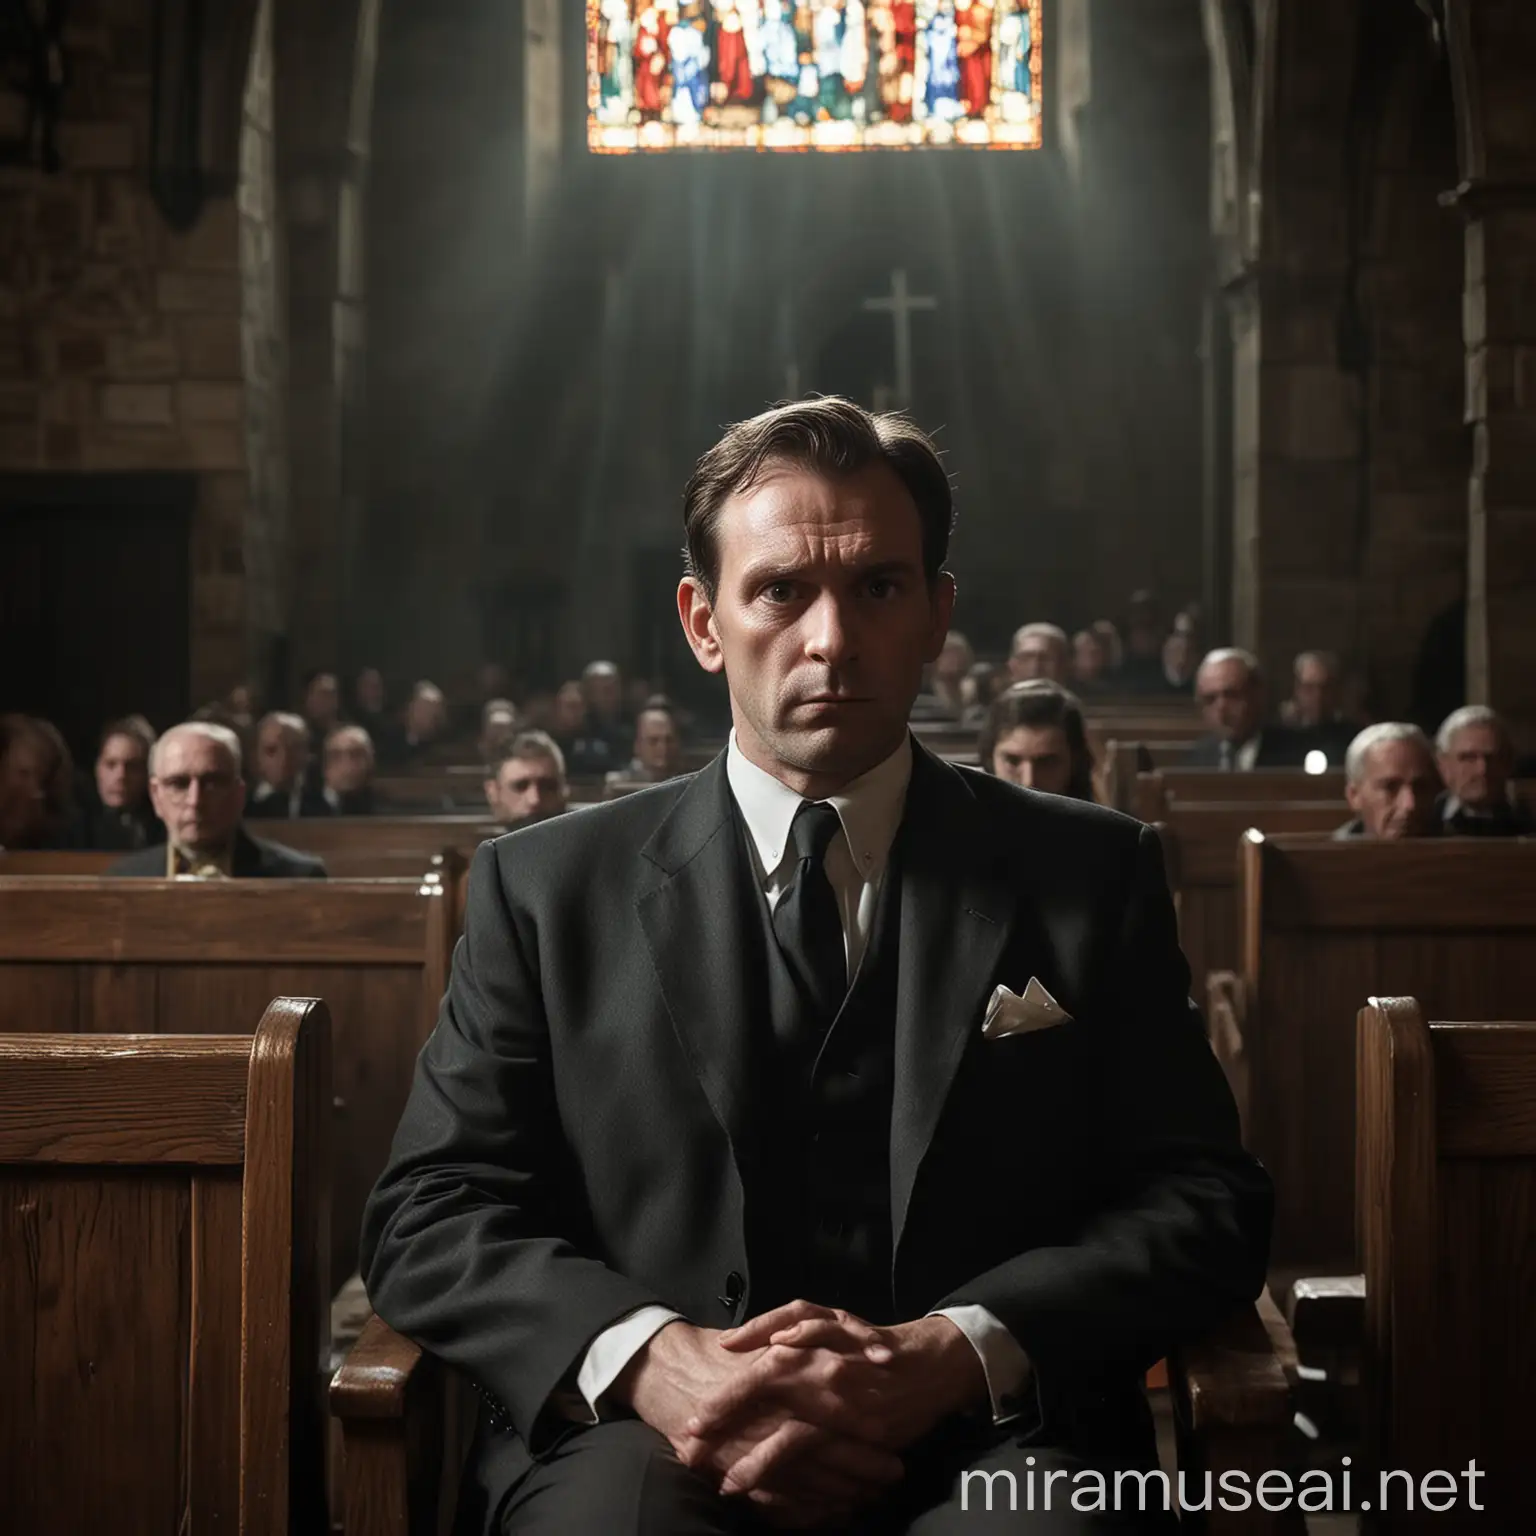 Eerie Man in Dimly Lit Church Haunting Presence in Gothic Setting